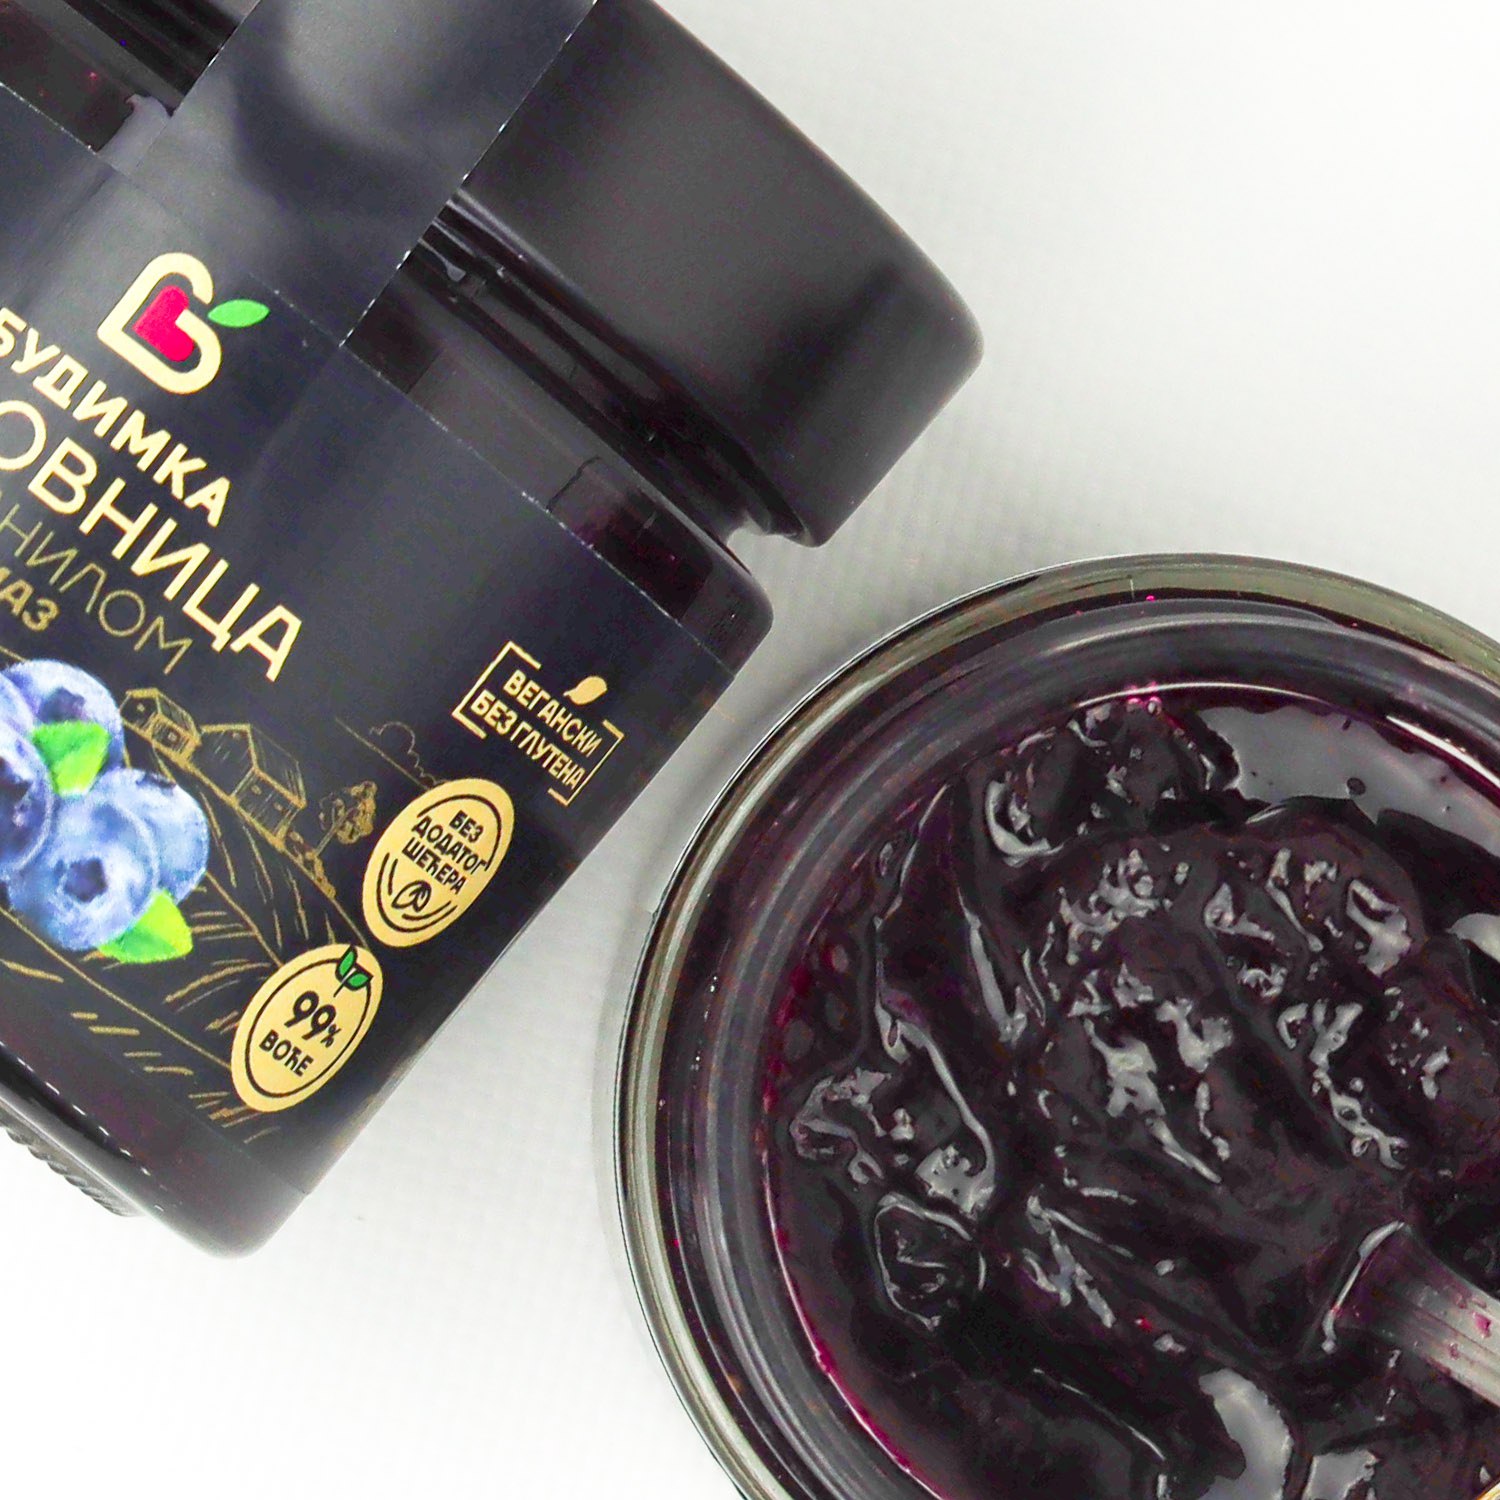 Fruit paste of blueberries and vanilla with the addition of white grapes,